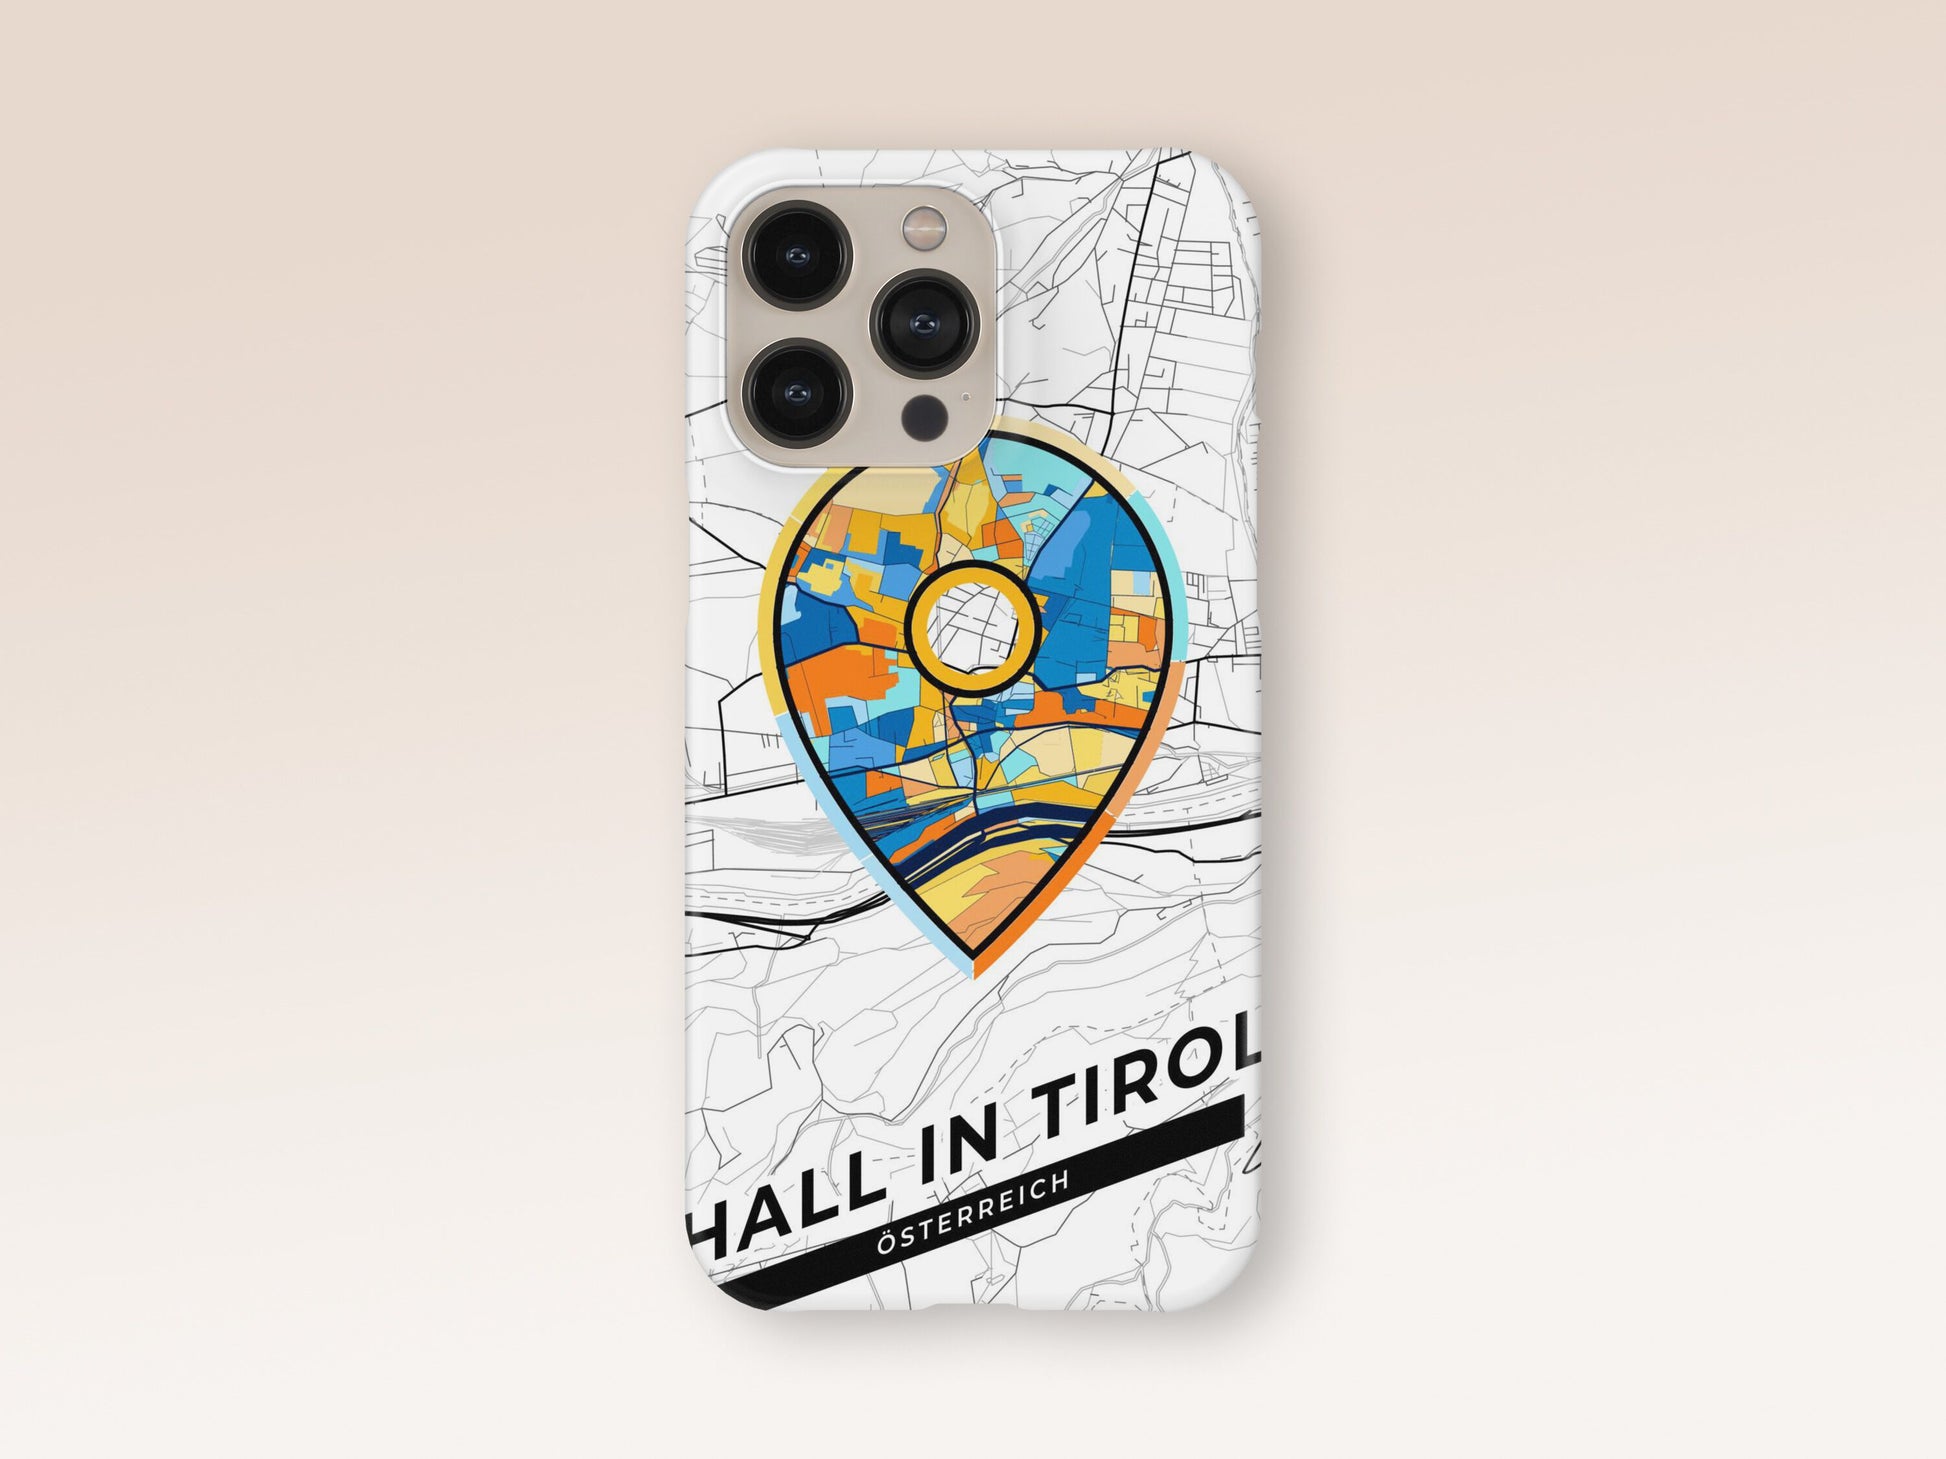 Hall In Tirol Österreich slim phone case with colorful icon. Birthday, wedding or housewarming gift. Couple match cases. 1